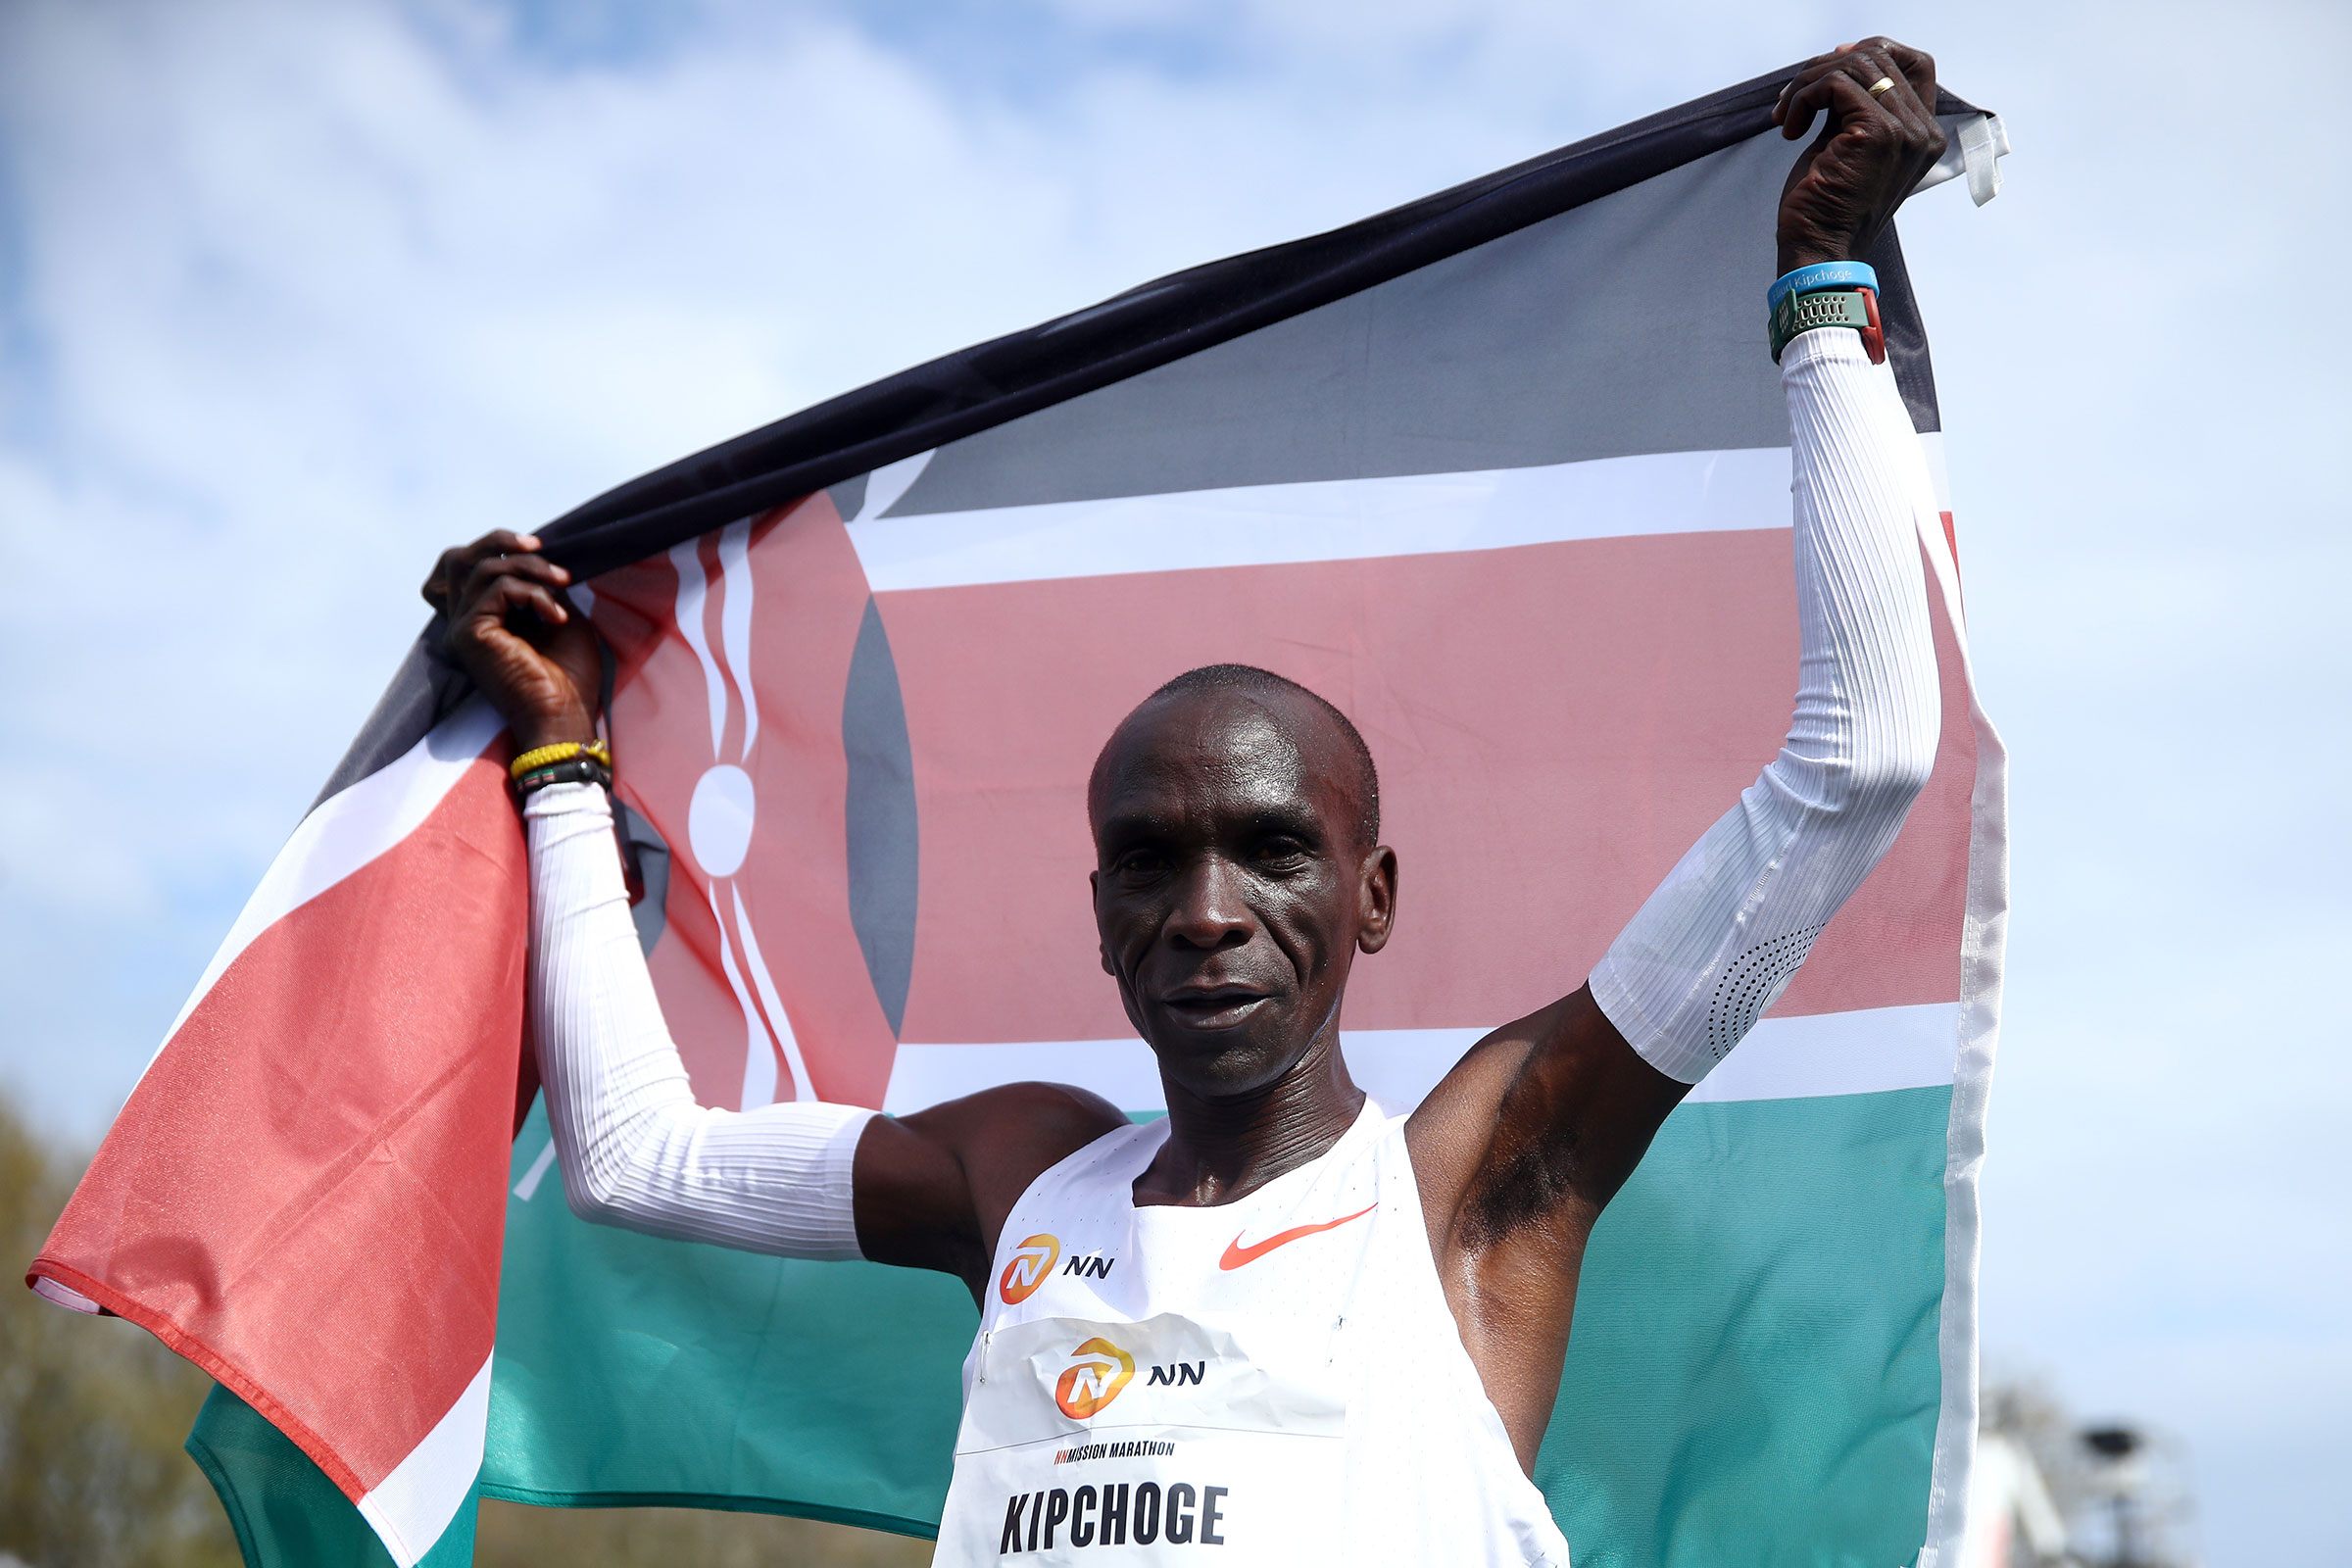 Eliud Kipchoge of Kenya, winner of the gold medal, crosses the finishing line and celebrates with a flag during the NN Mission Marathon held on April 18, 2021 in Enschede, Netherlands.